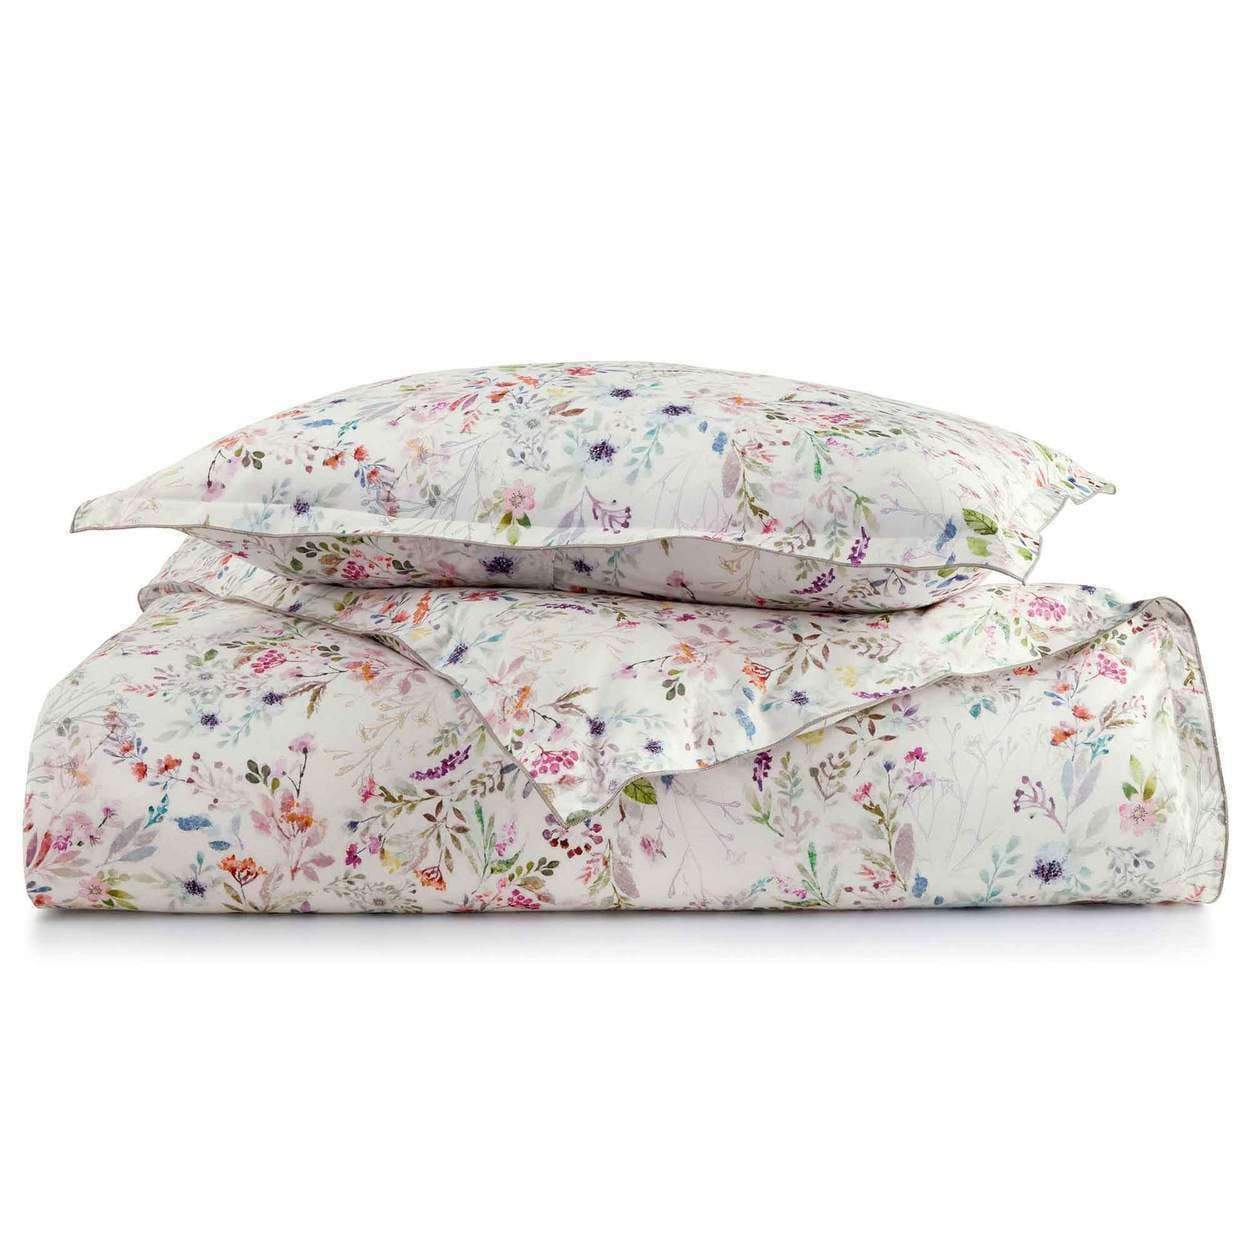 Duvet Covers Chloe Floral Percale Duvet Cover by Peacock Alley Peacock Alley